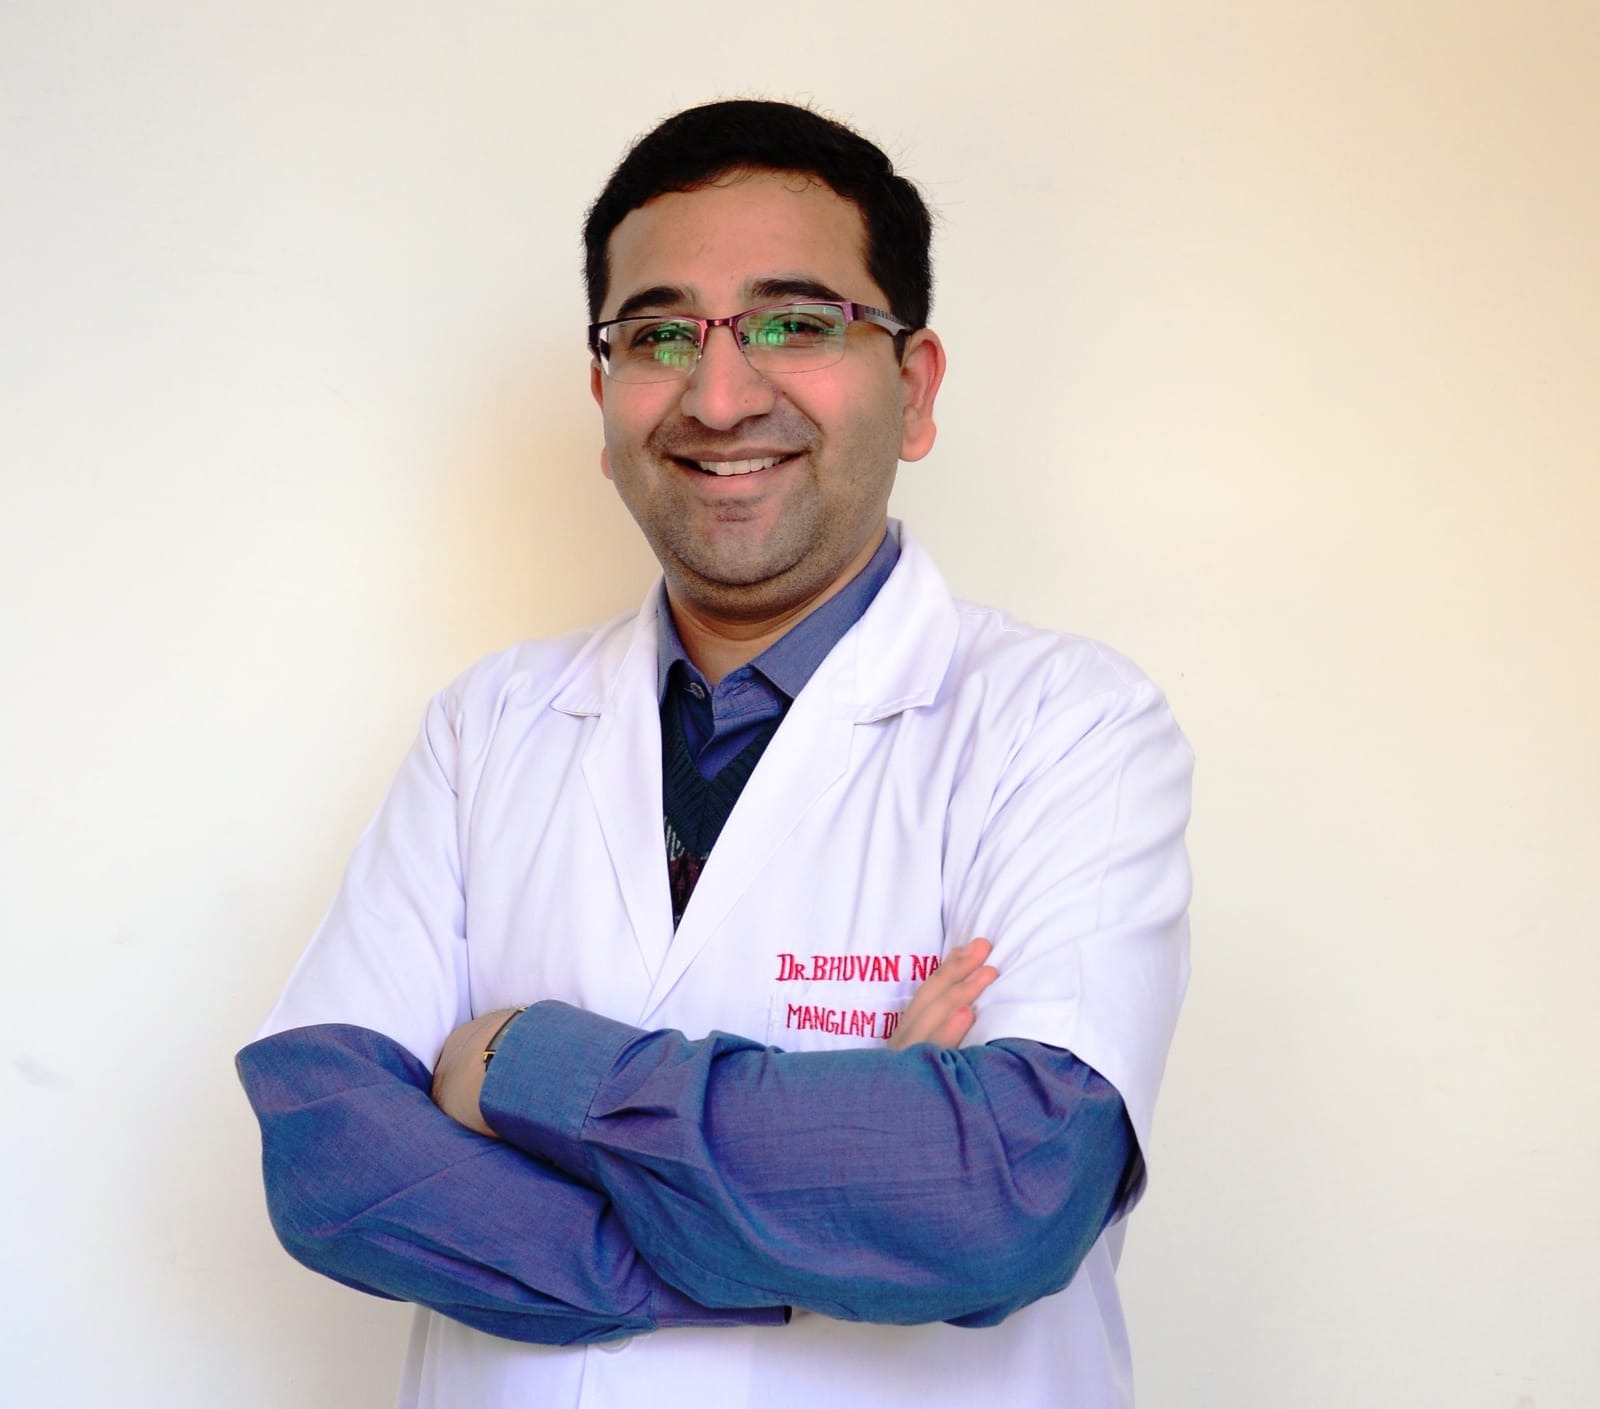 The Legal Mind in Healthcare: Dr. Bhuvan Nagpal’s Academic Odyssey